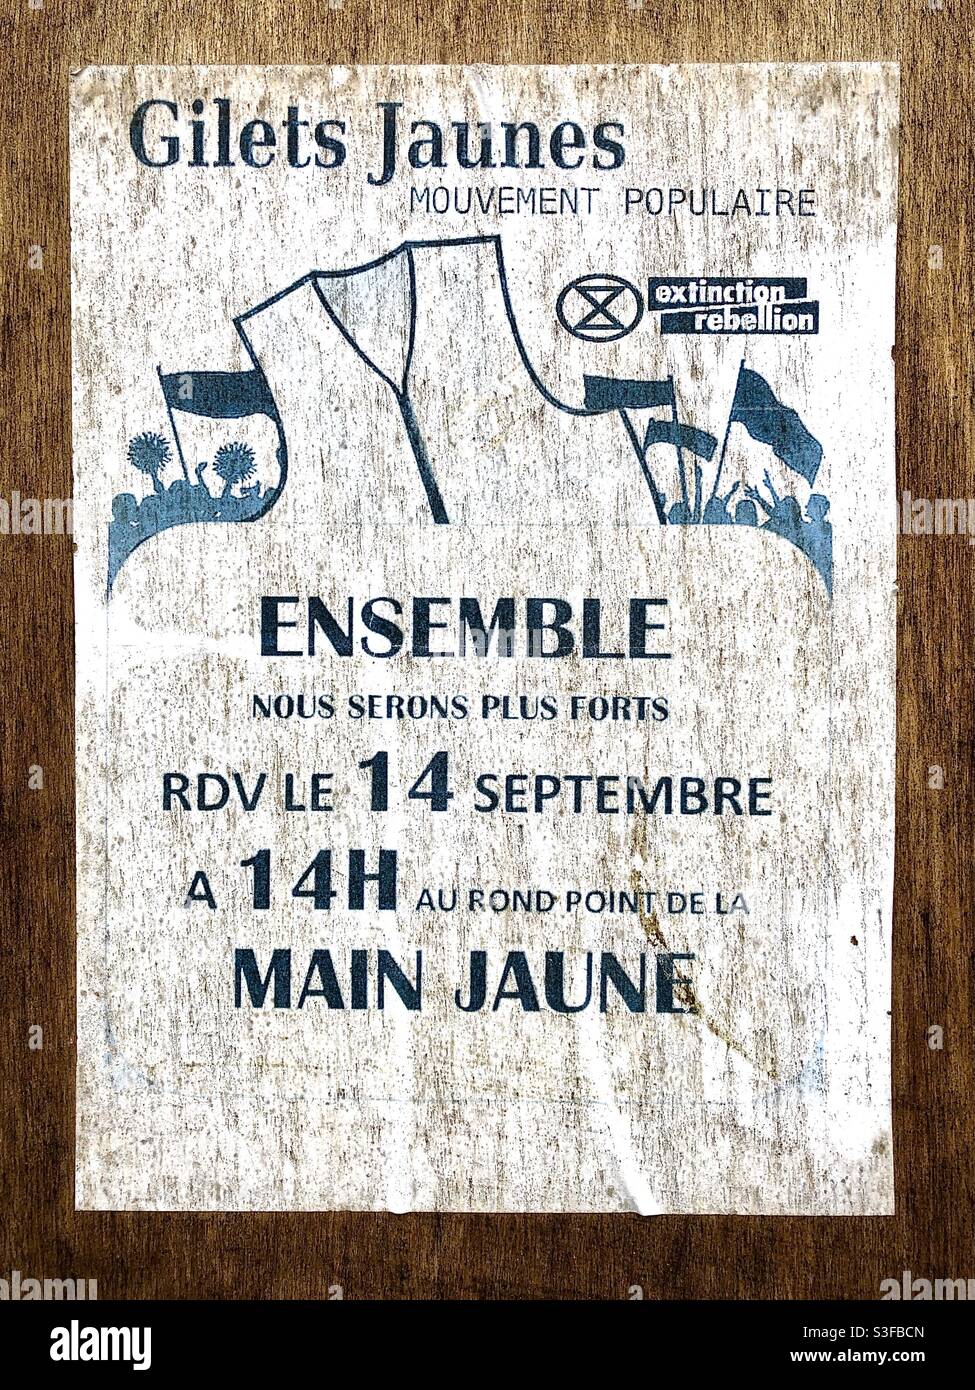 Flyer for a Gilets Jaunes (Yellow Vests) strike meeting in France. Stock Photo